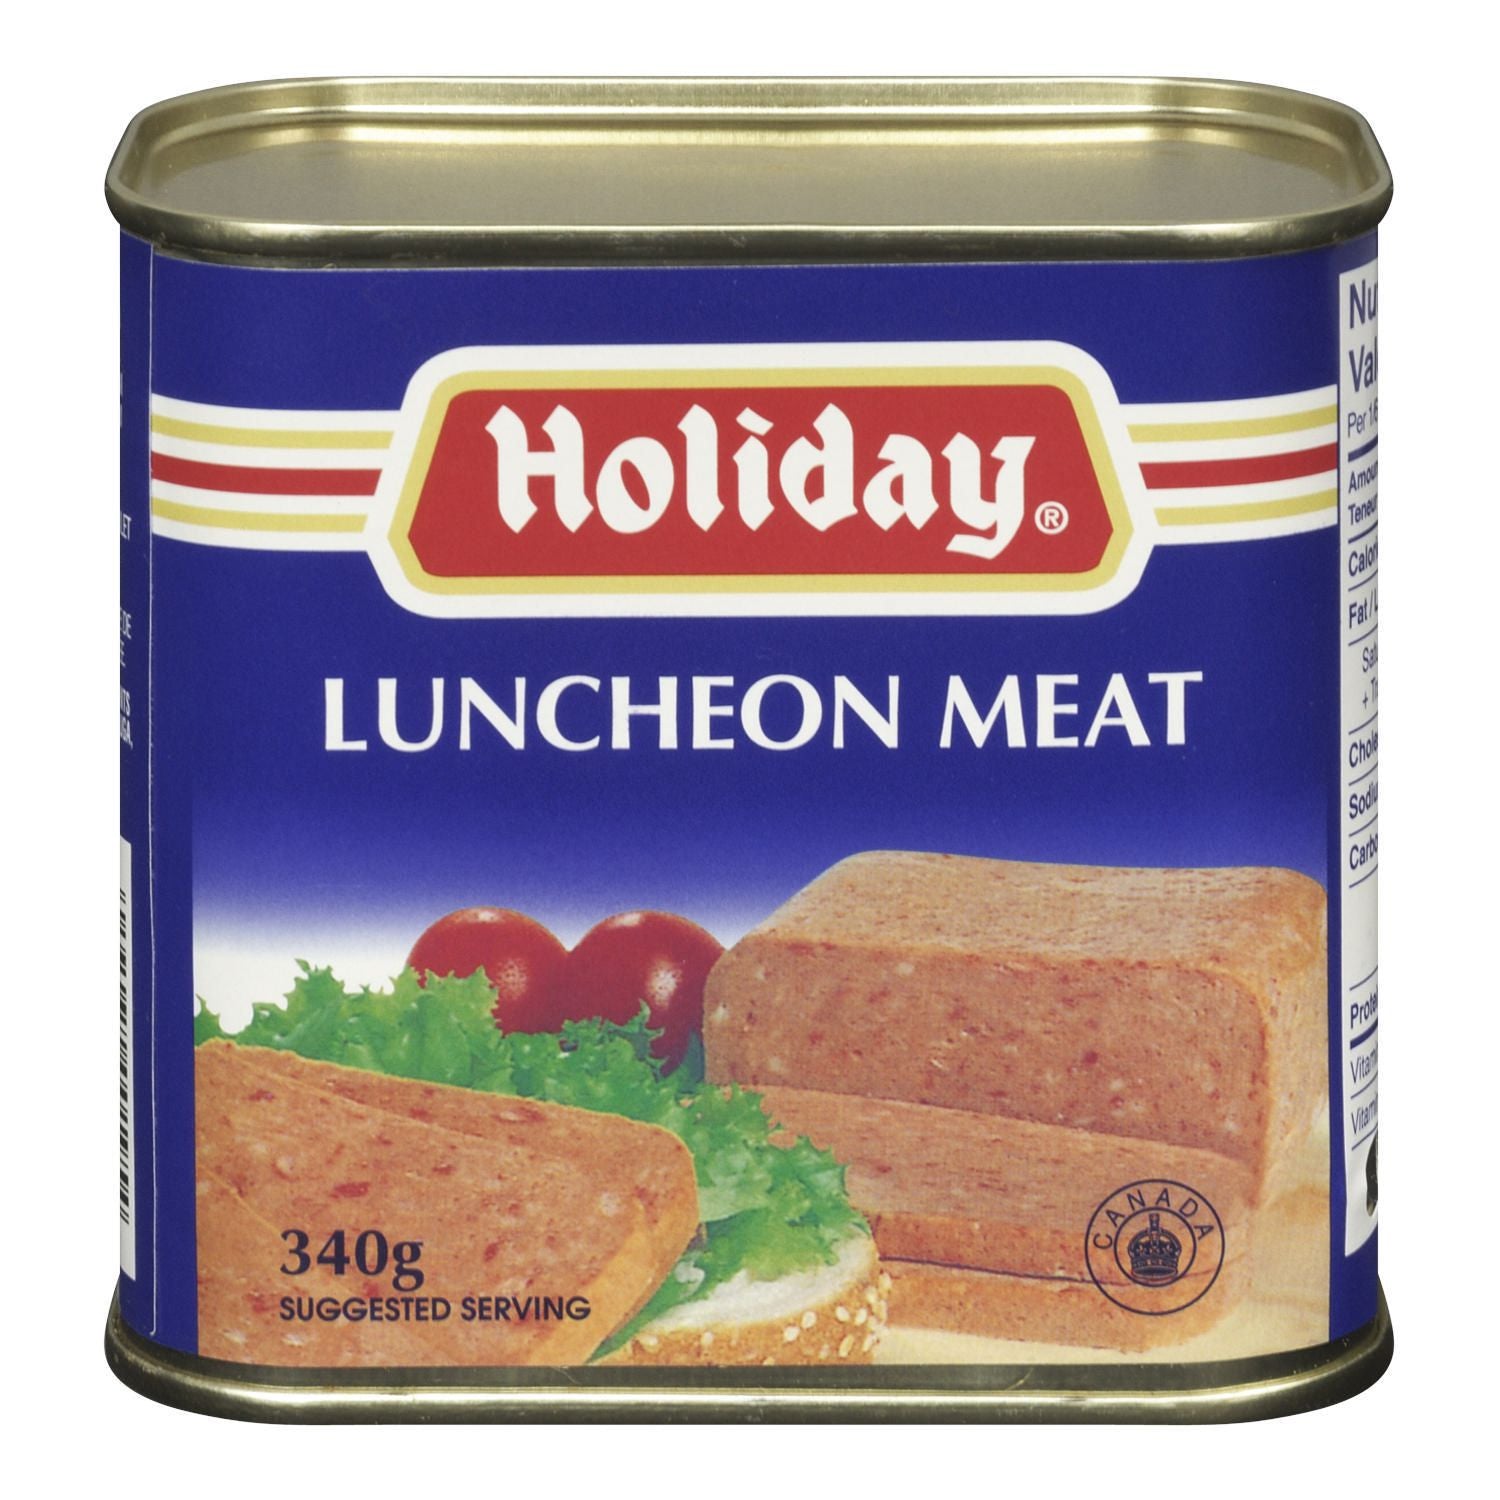 Holiday Luncheon Meat (340g)